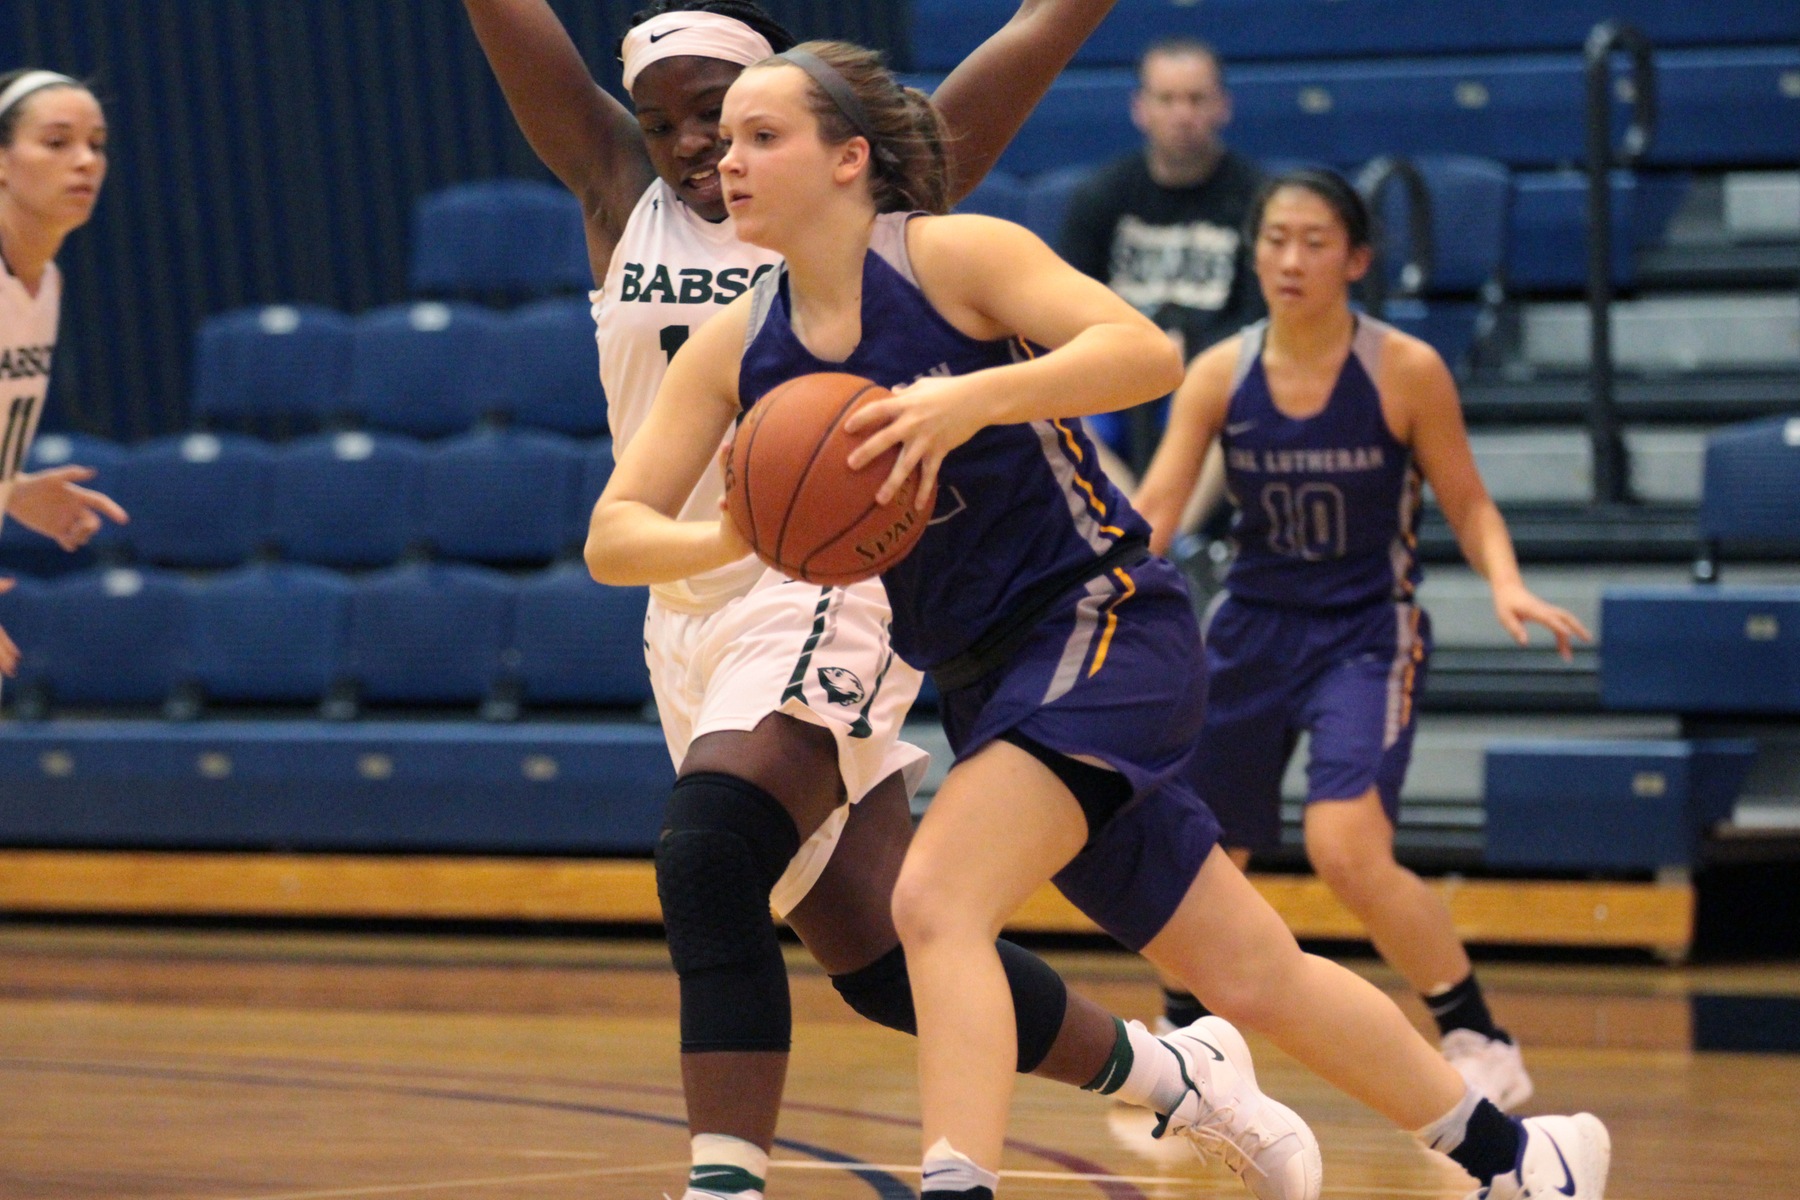 Regals Second Half Rally Comes Up Short Against Beavers